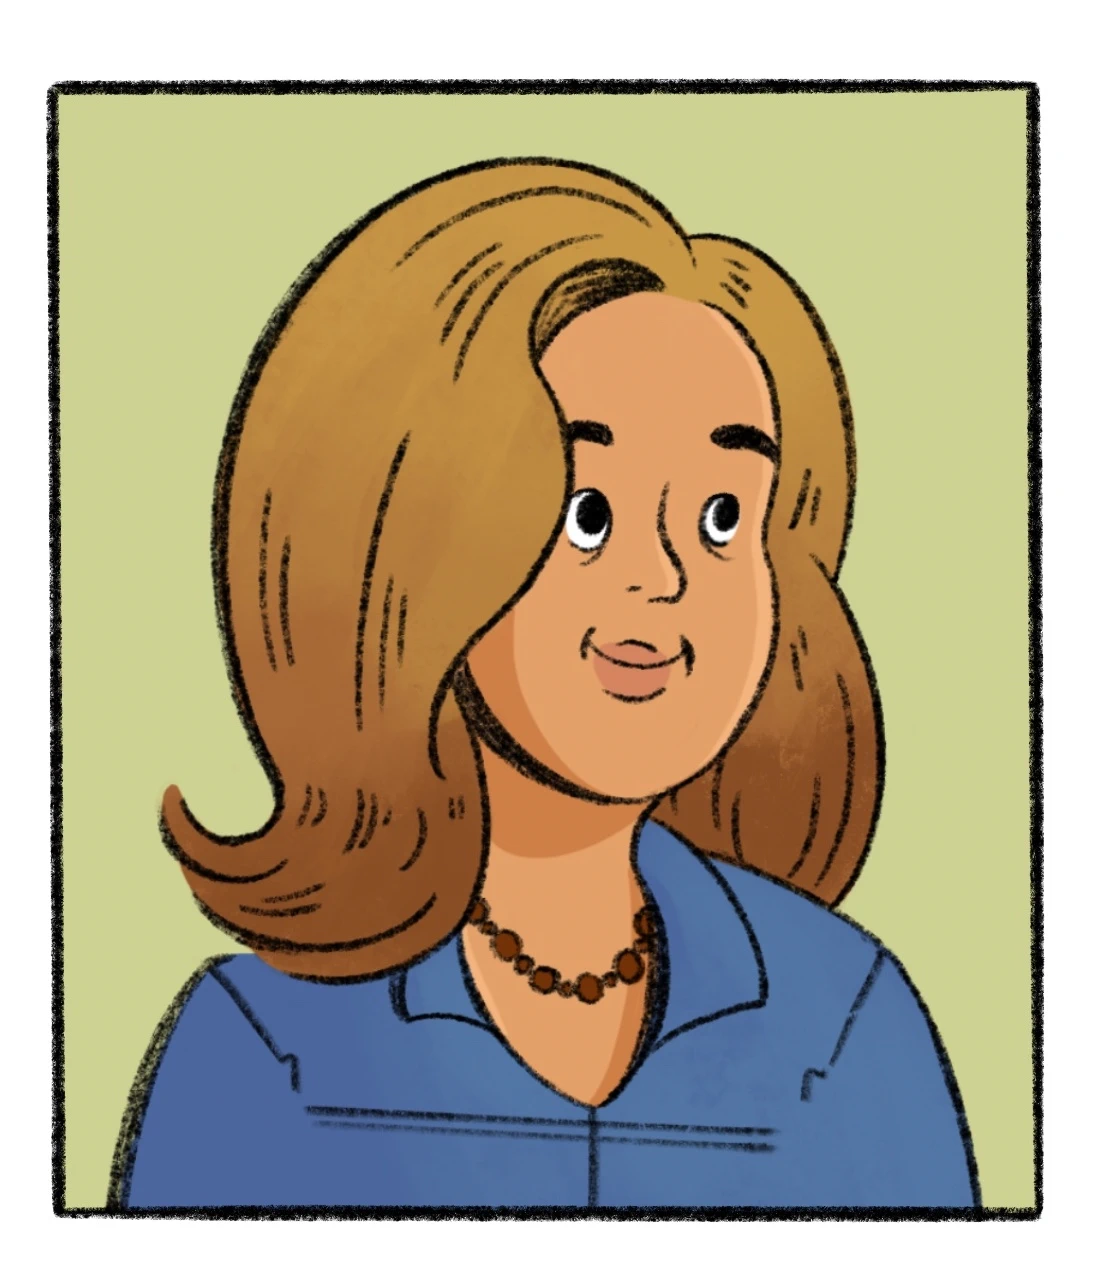 An illustrated portrait of Consuelo Morales